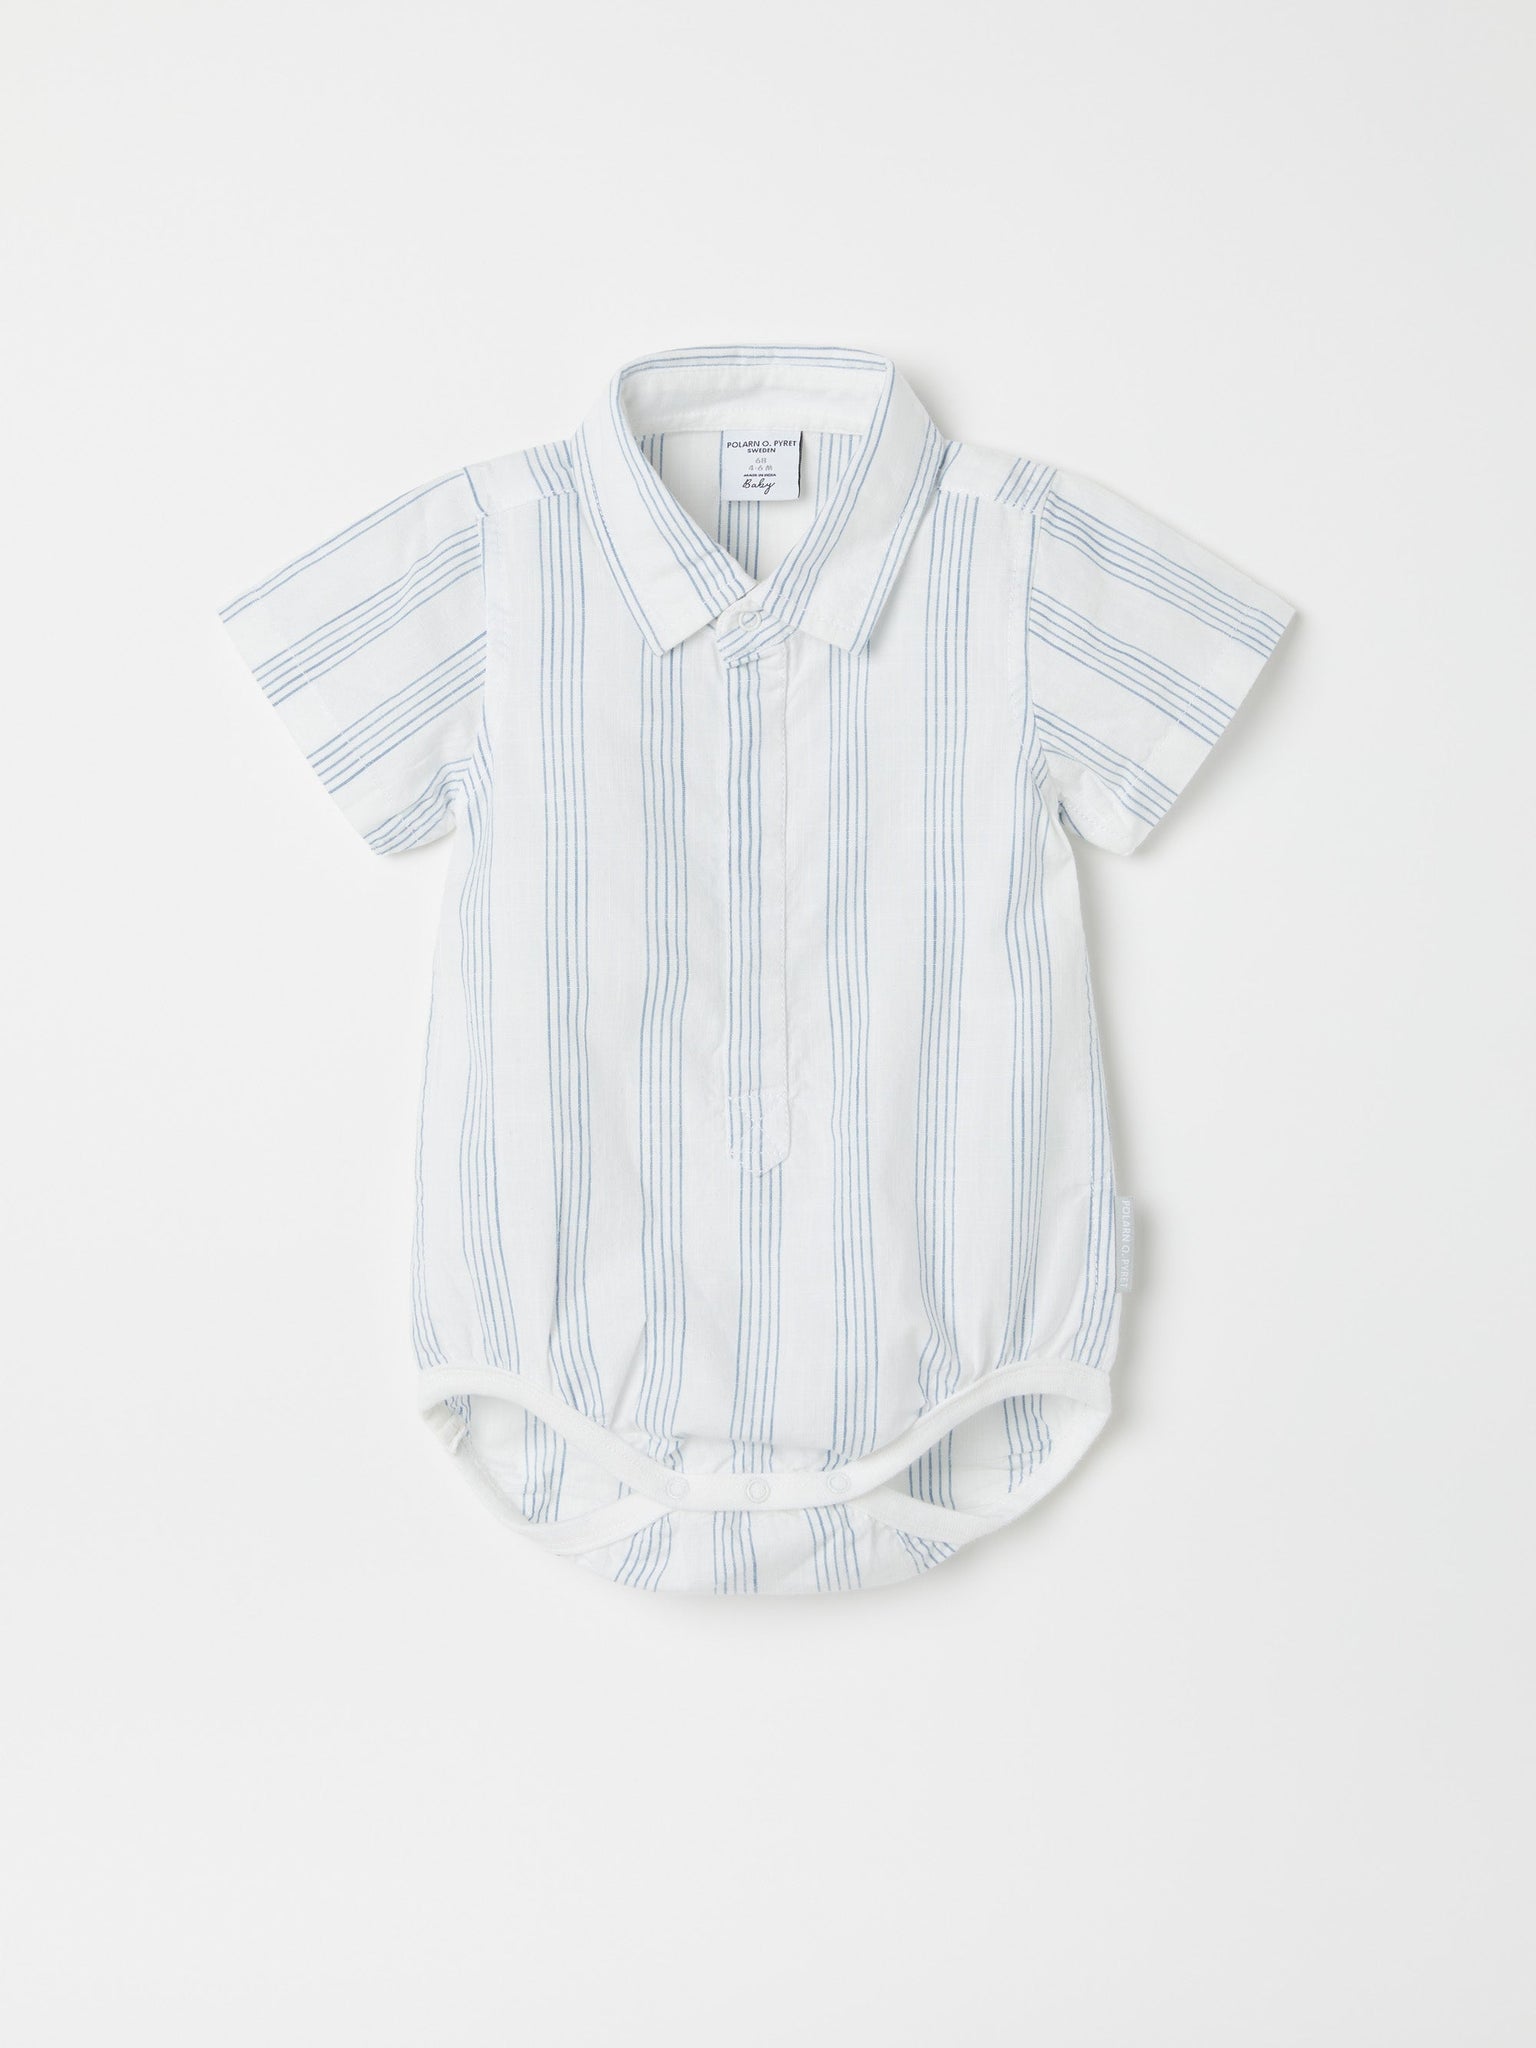 Organic Cotton Striped Collared Babygrow from the Polarn O. Pyret baby collection. Clothes made using sustainably sourced materials.